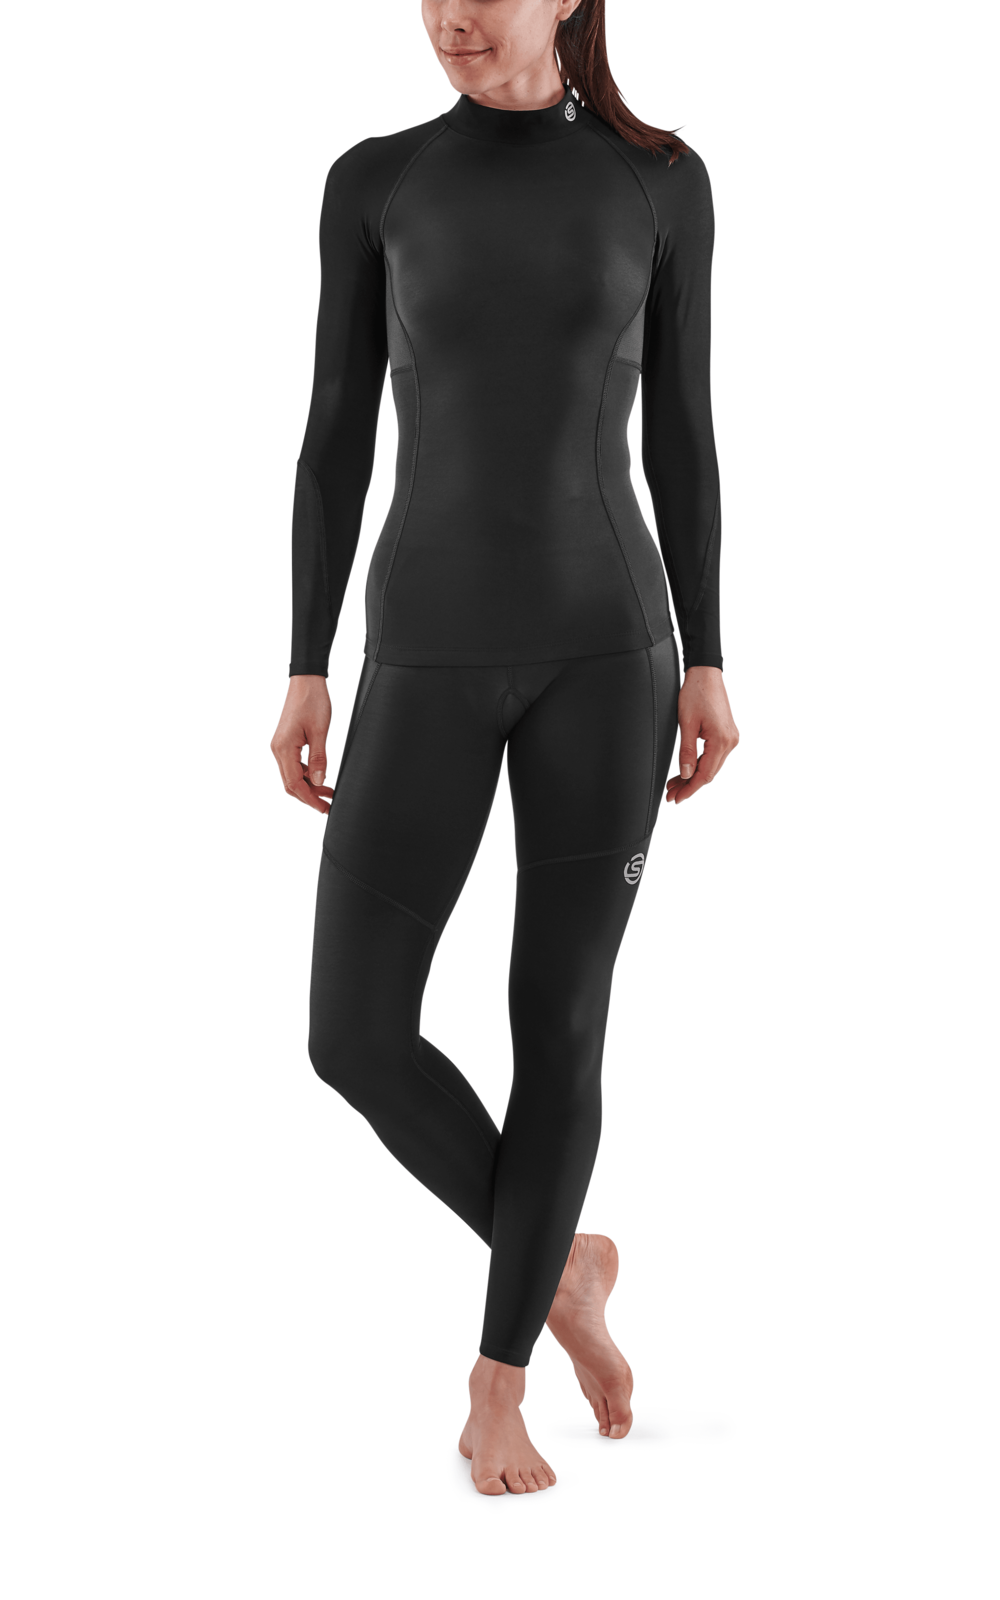 SKINS Compression Women's 3-Series Long Tights - Black